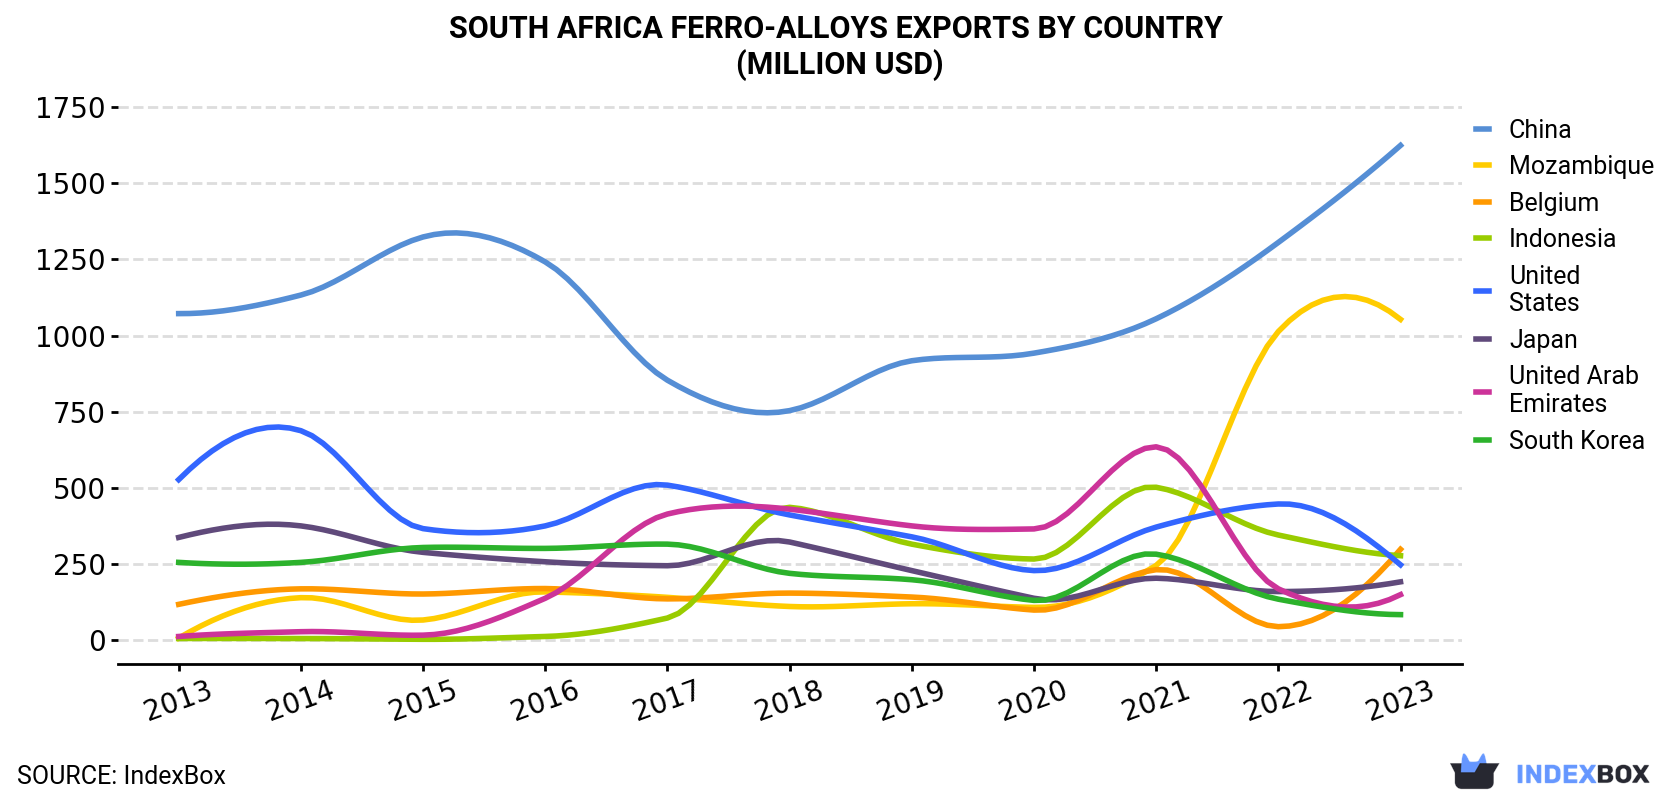 South Africa Ferro-Alloys Exports By Country (Million USD)